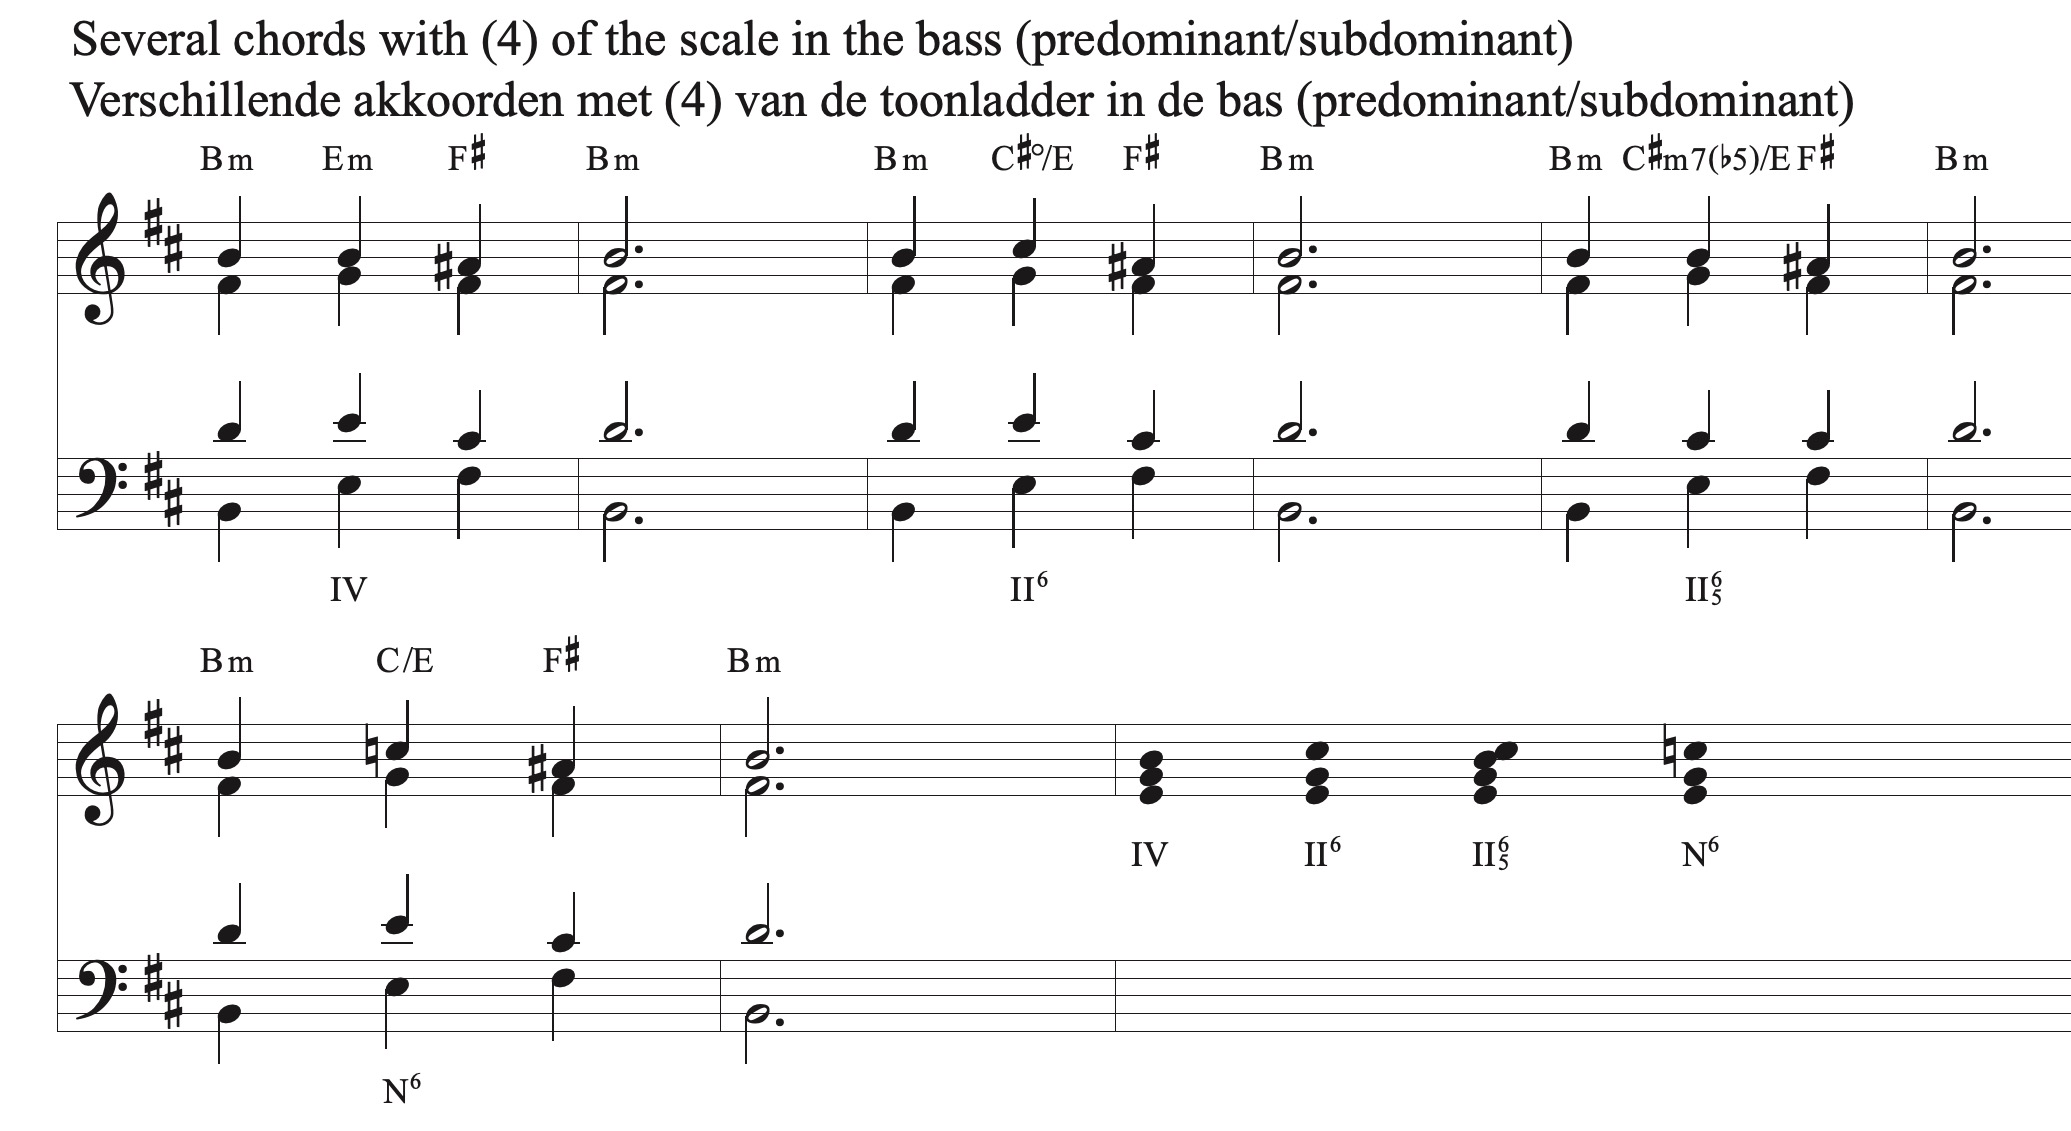 sudominant variants with (4) in the bas MINOR.jpeg